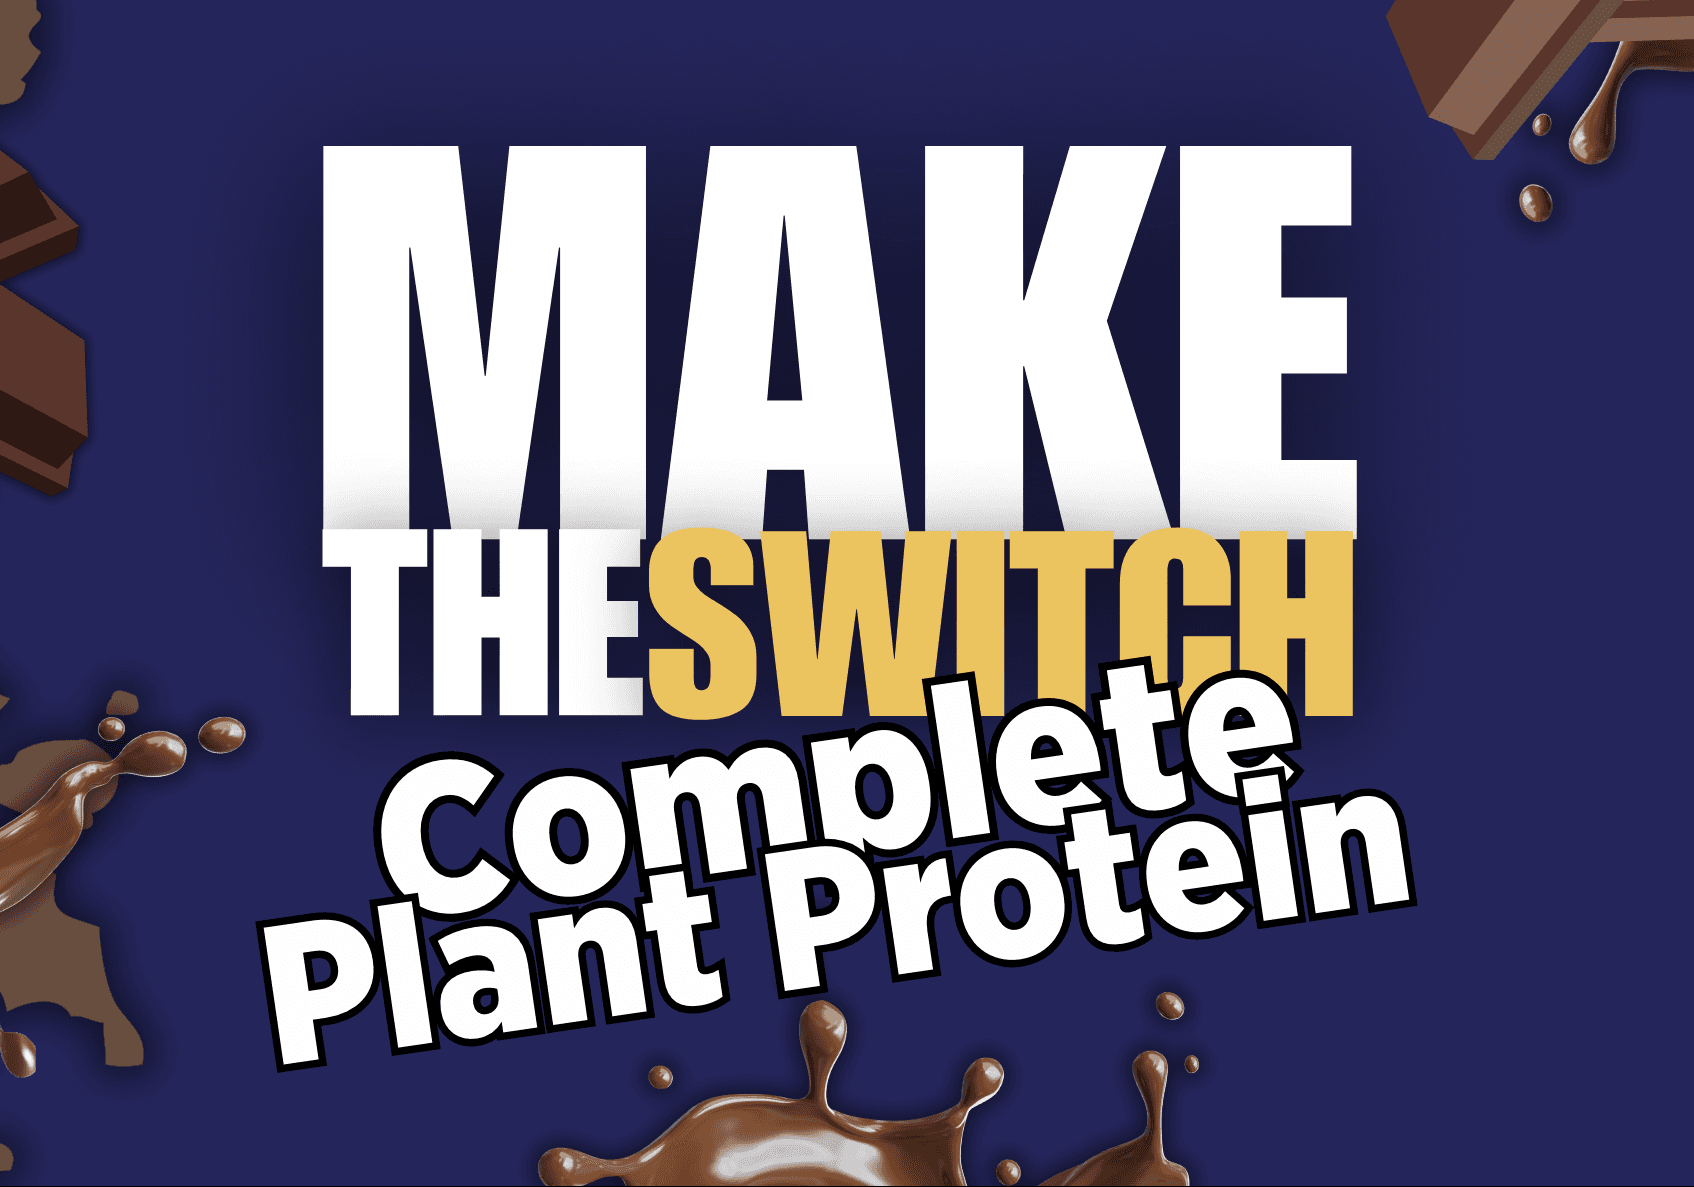 Introducing Gr8 Health's Complete Plant Protein